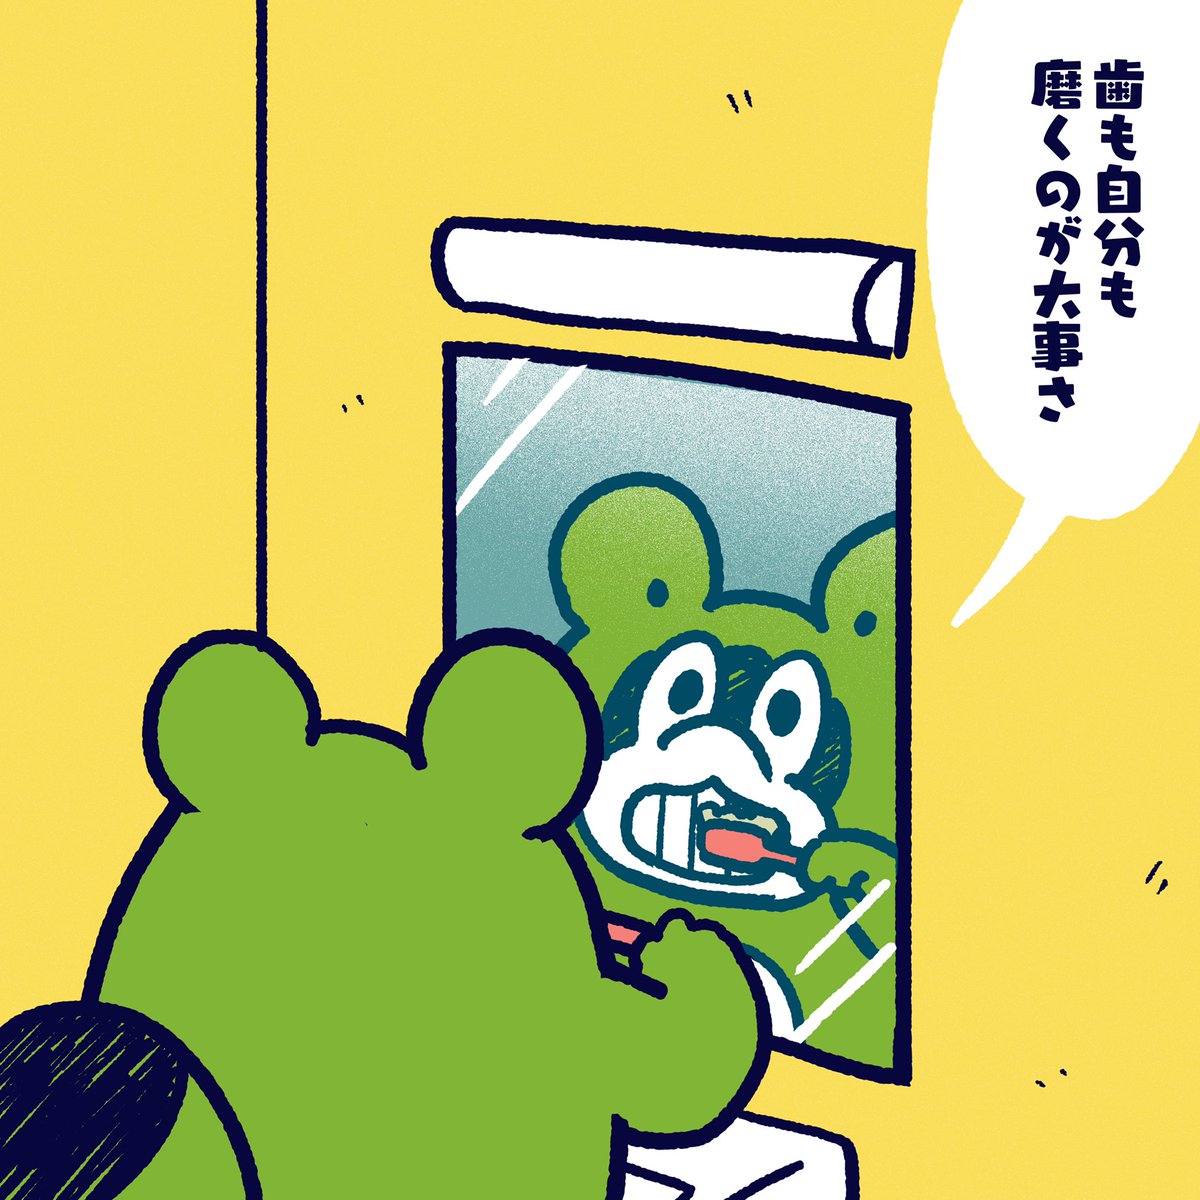 It is  very important to brush your teeth and yourself. #今日のポコタ #イラスト #マンガ #よい歯の日 